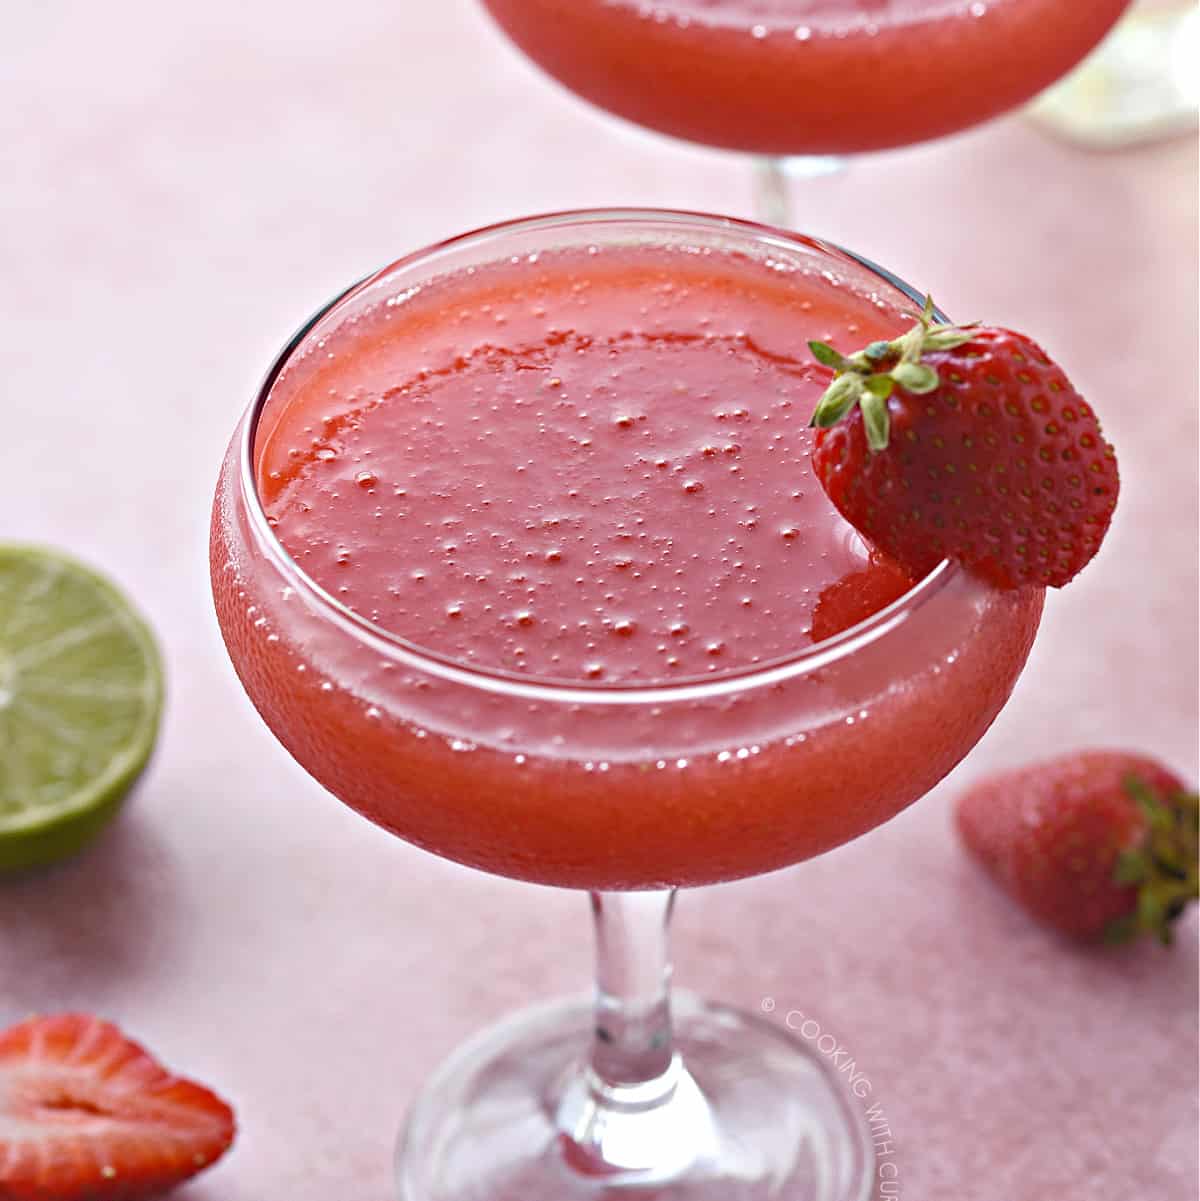 Frozen Strawberry Daiquiri Cooking With Curls,Hummingbird Food Chain